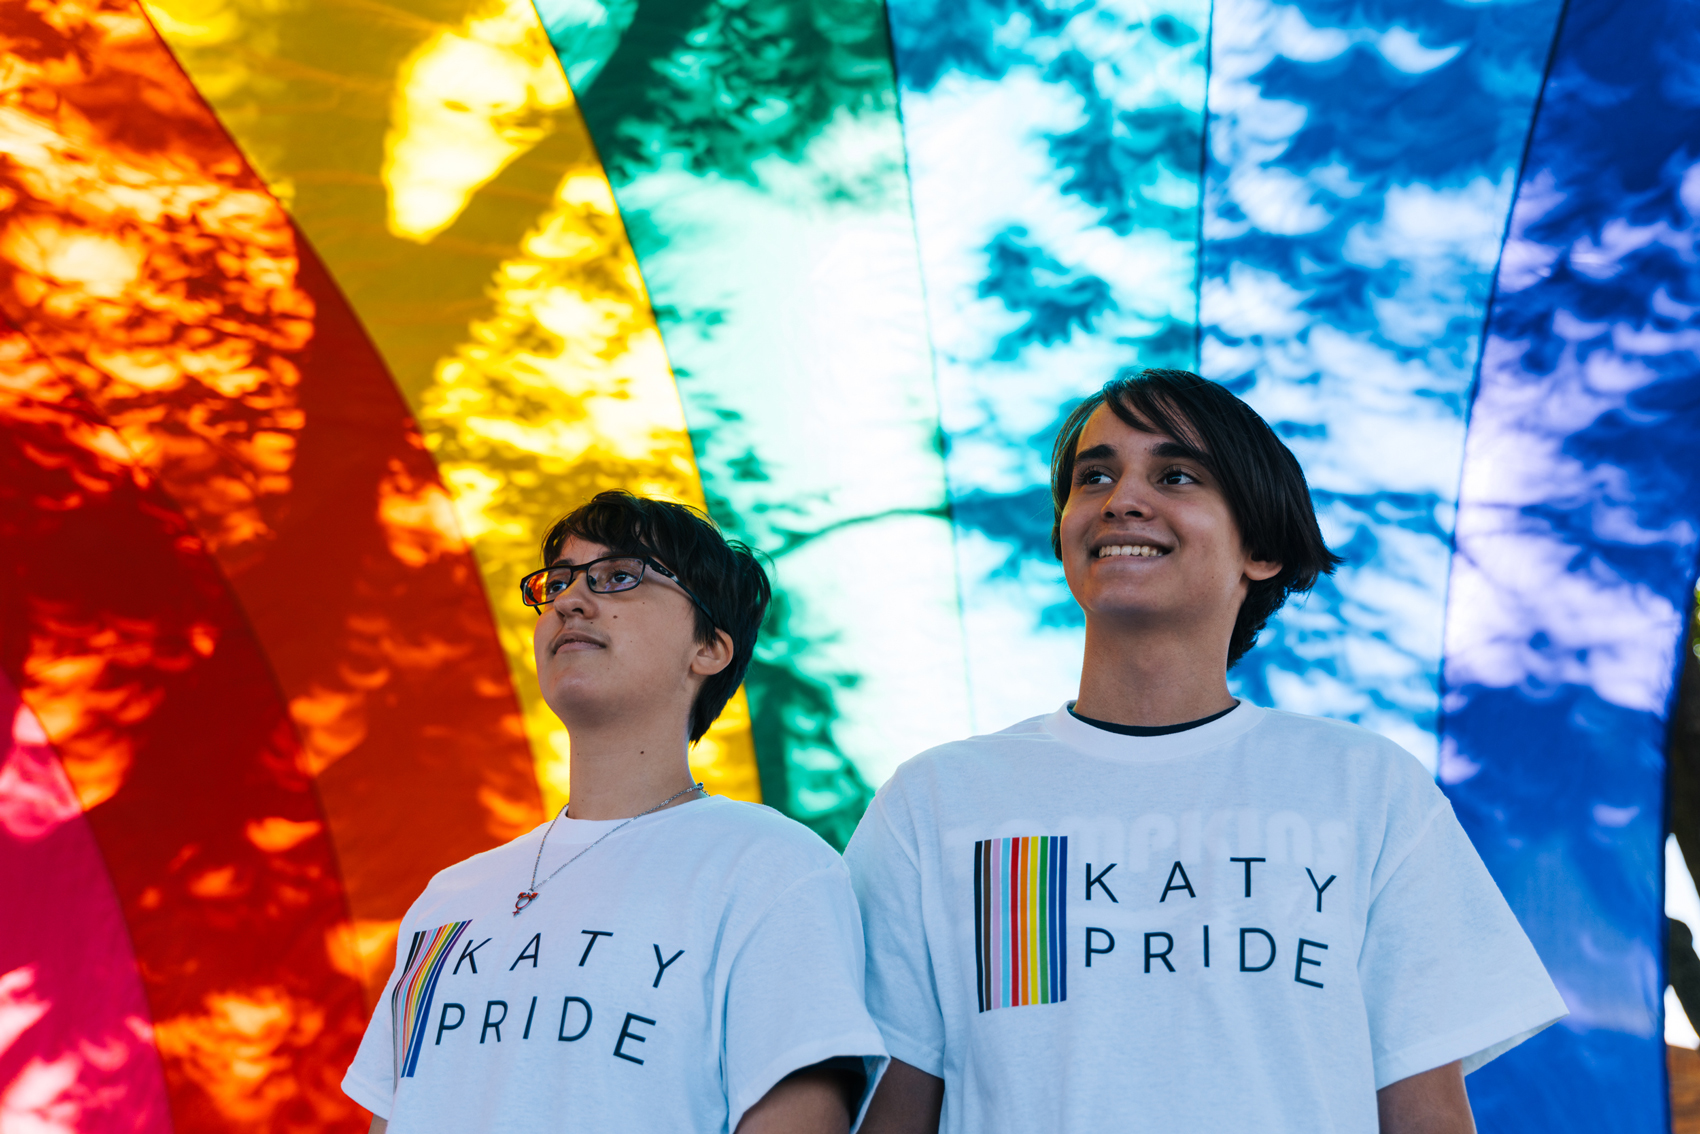 From the left, Ash Thornton, 16, and Travis Thornton, 16, from Tompkins High School pose for a portrait during Katy Pride Festival at First Christian Church